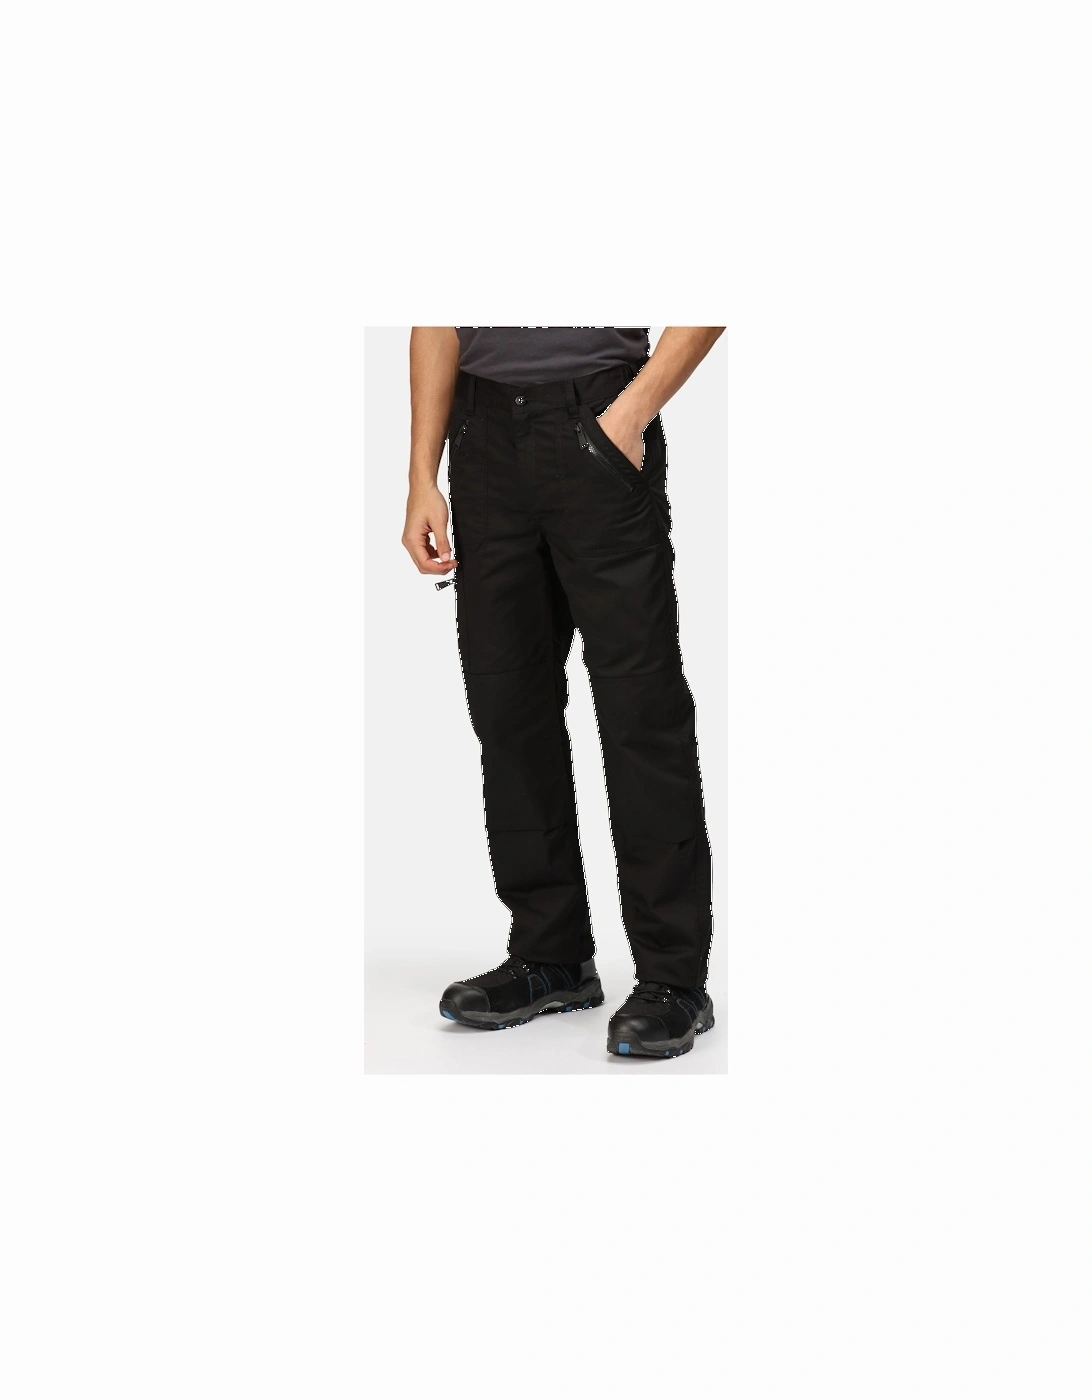 Mens Pro Action Waterproof Trousers - Long (34in)